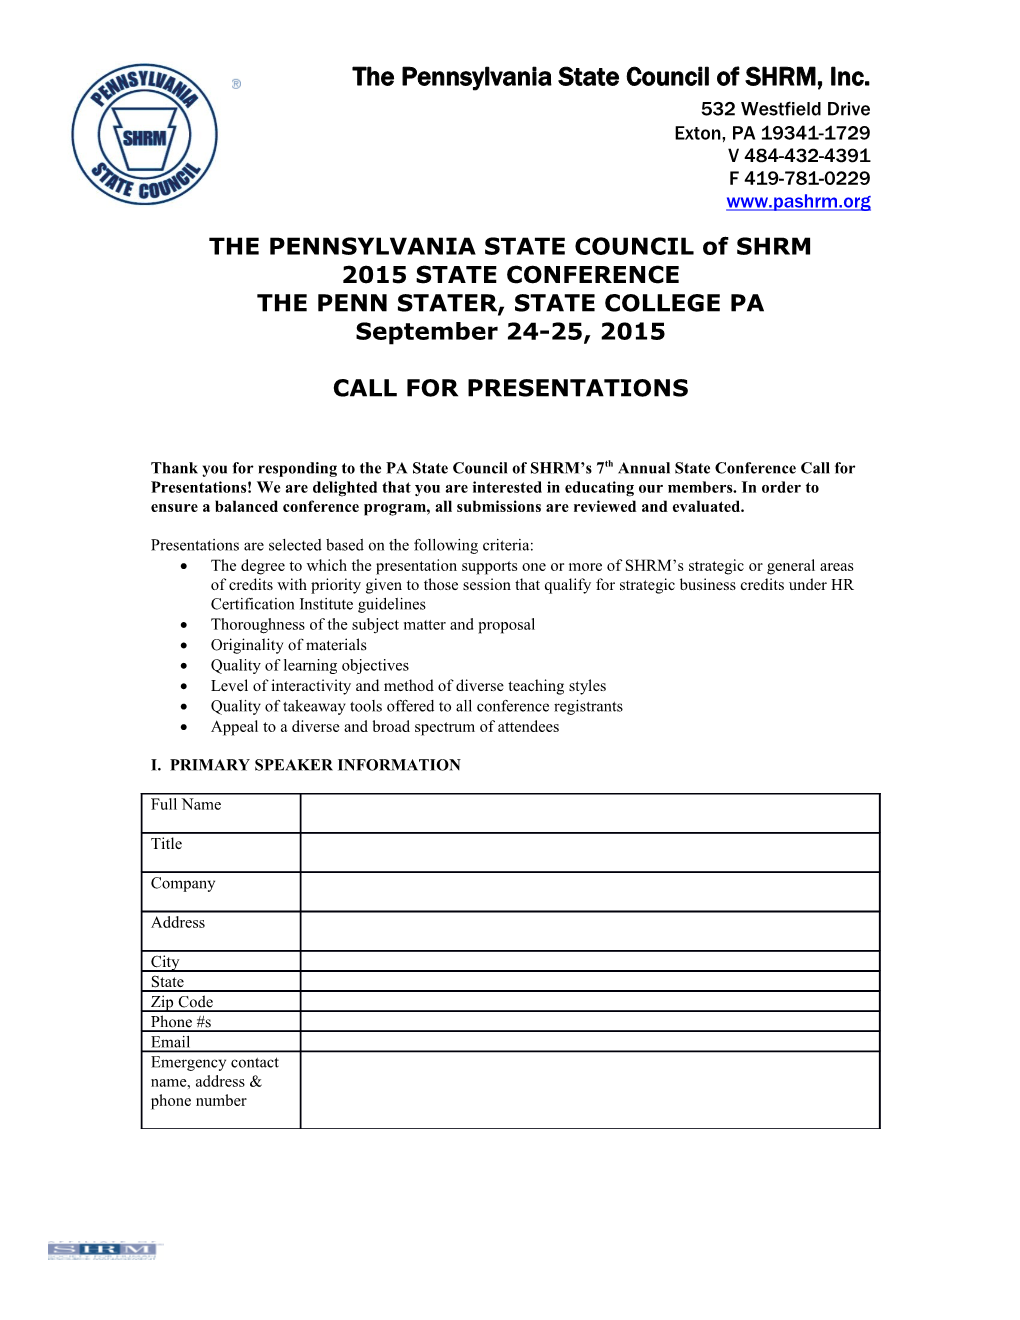 THE PENNSYLVANIA STATE COUNCIL of SHRM